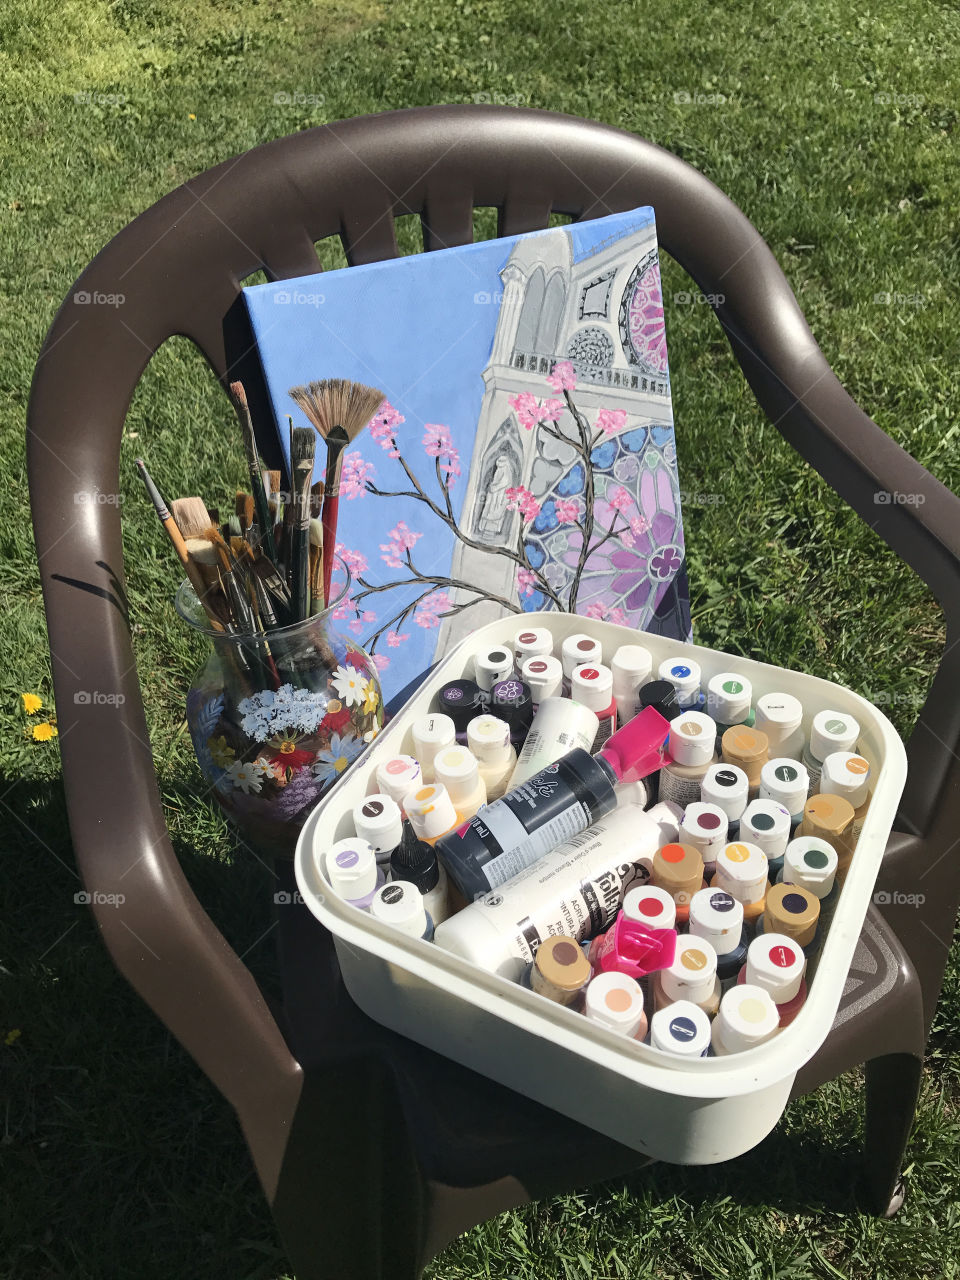 Painting, paints, brushes, and painted vase